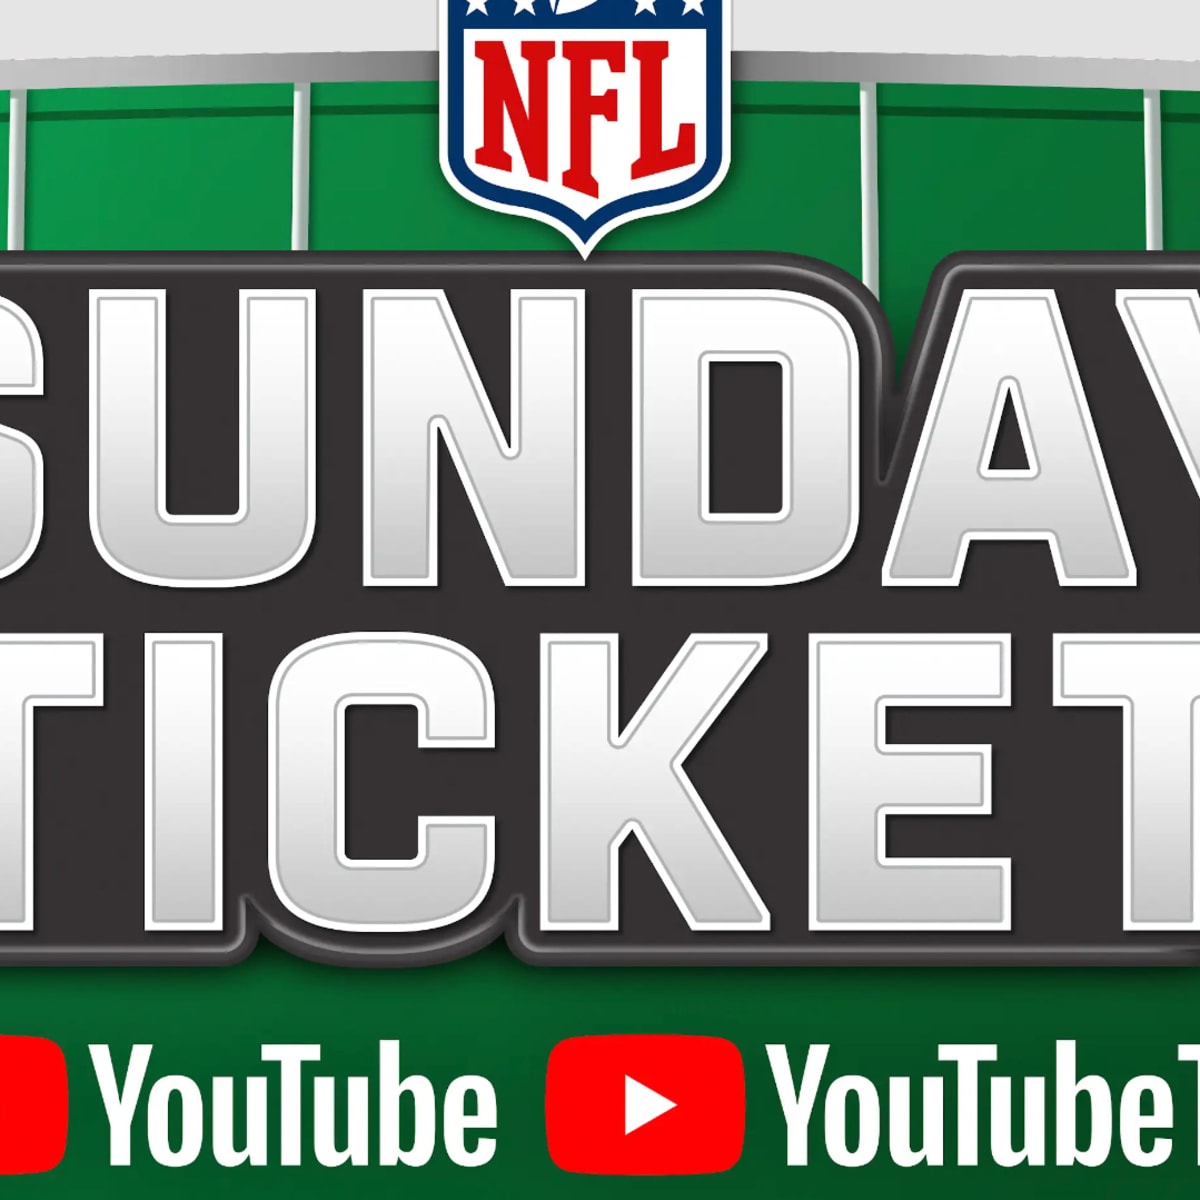 NFL Sunday Ticket on   will present challenge for viewers